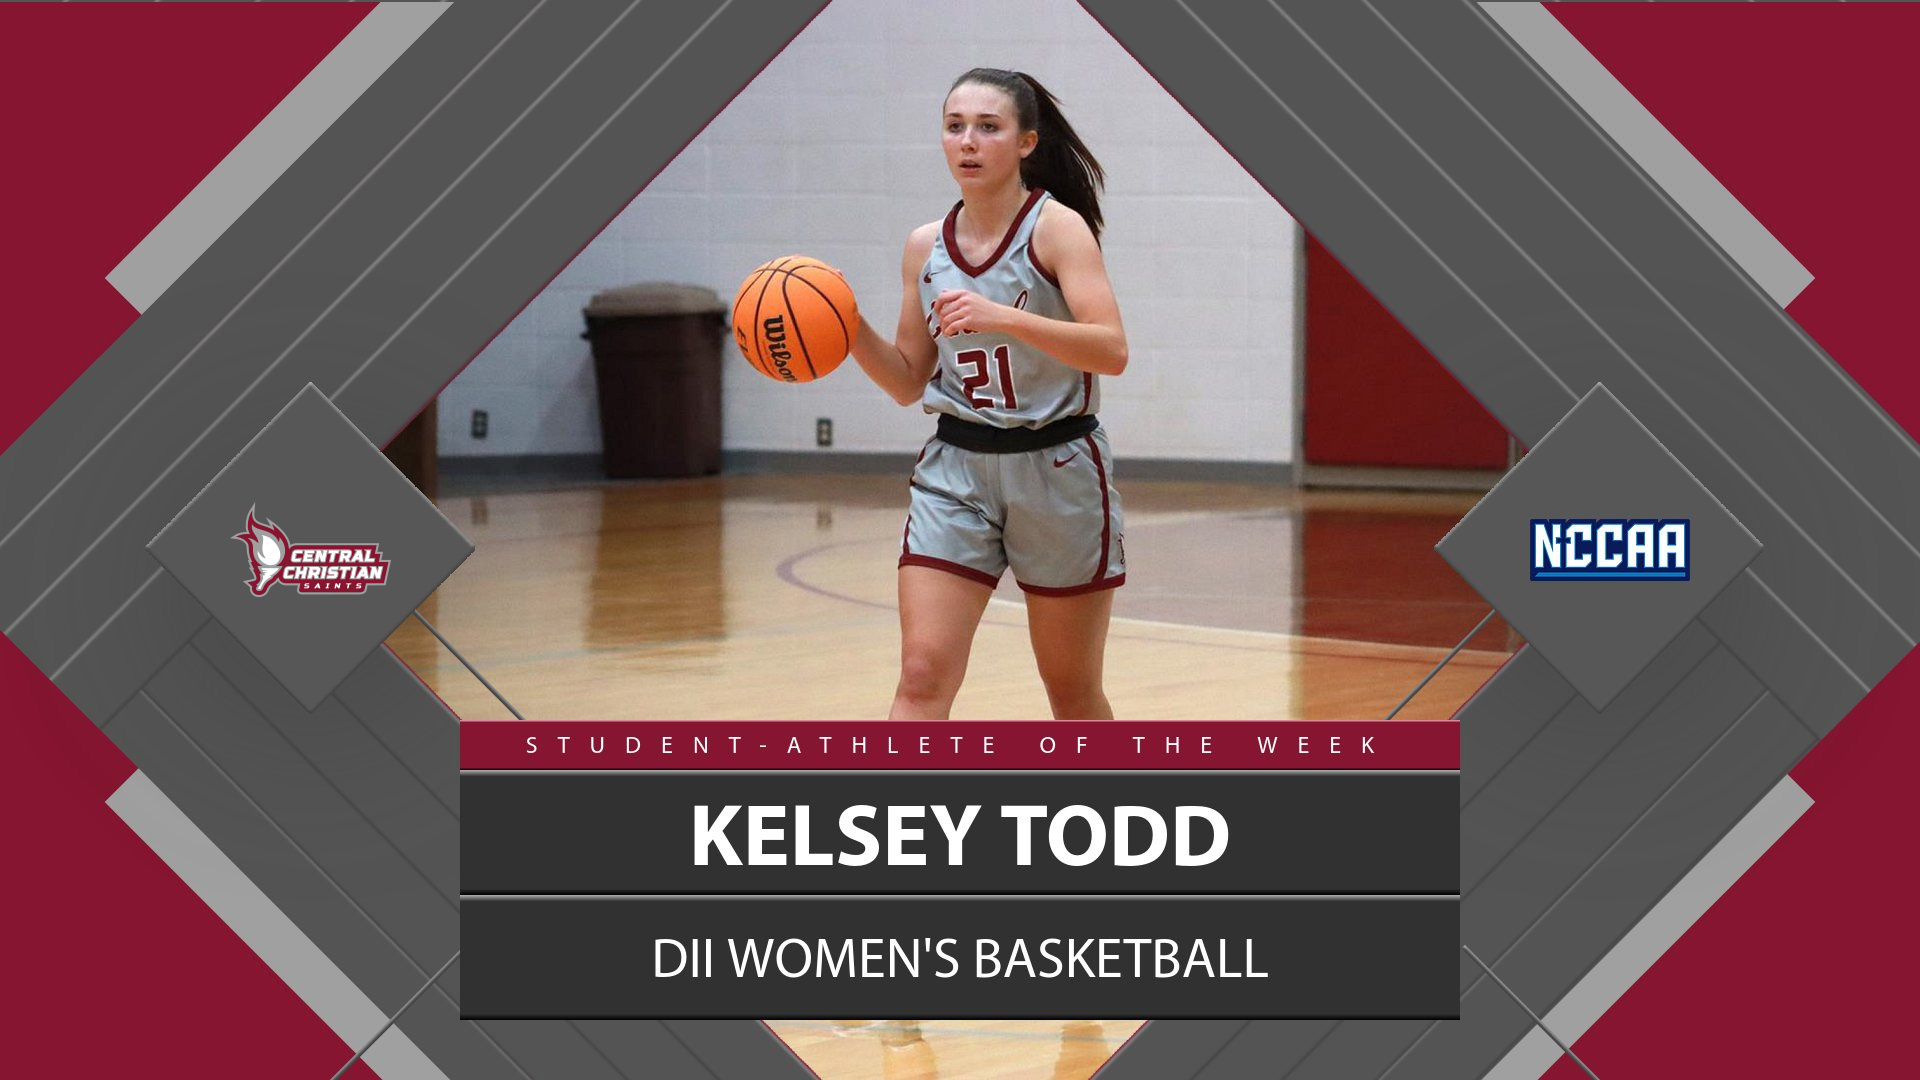 Saints freshman Kelsey Todd was named Student-Athlete of the Week for NCCAA Division II during the week of Nov. 7-13.